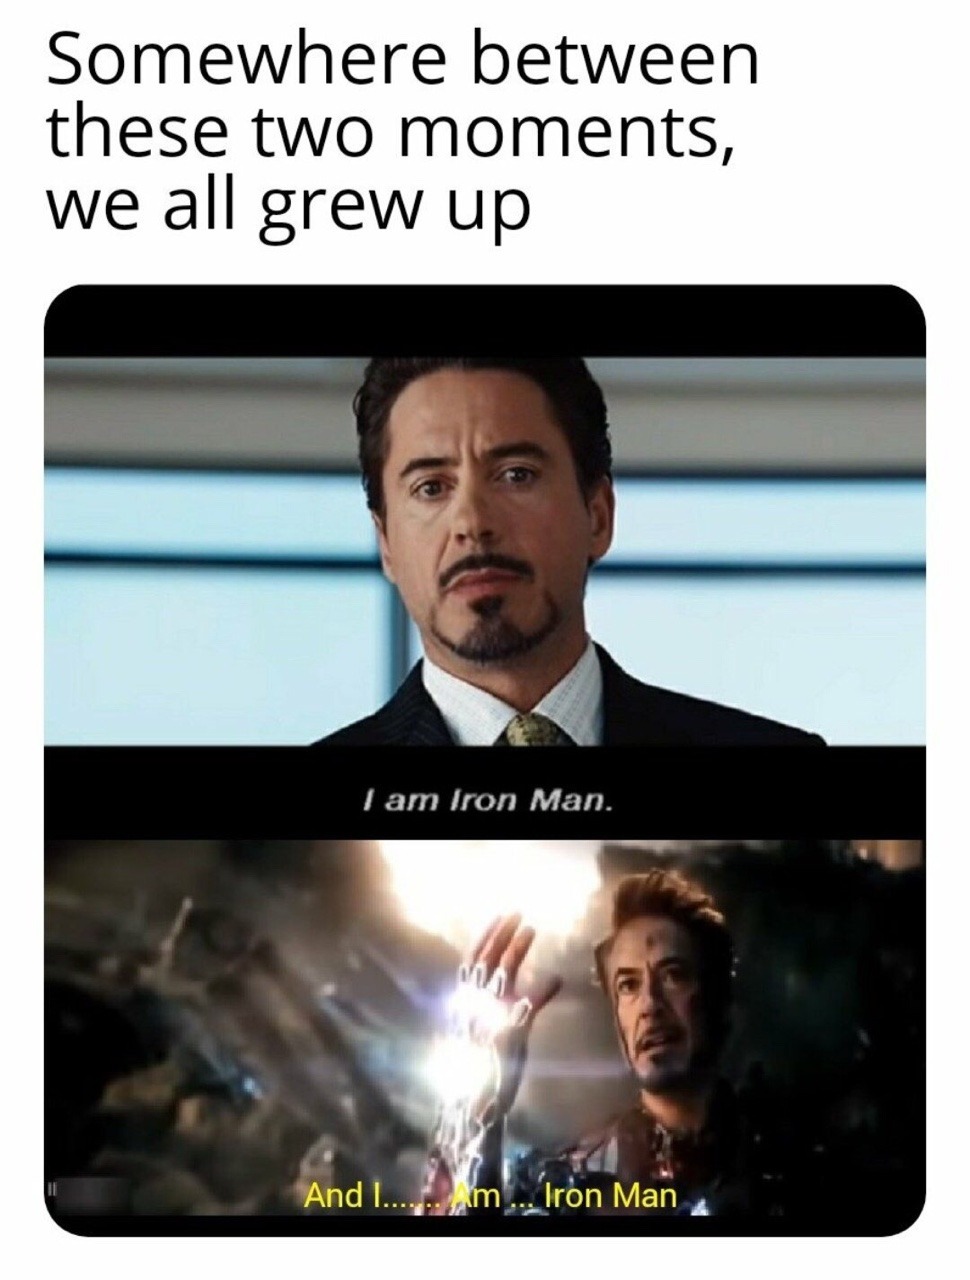 I was already grown up before the first one, but... - meme